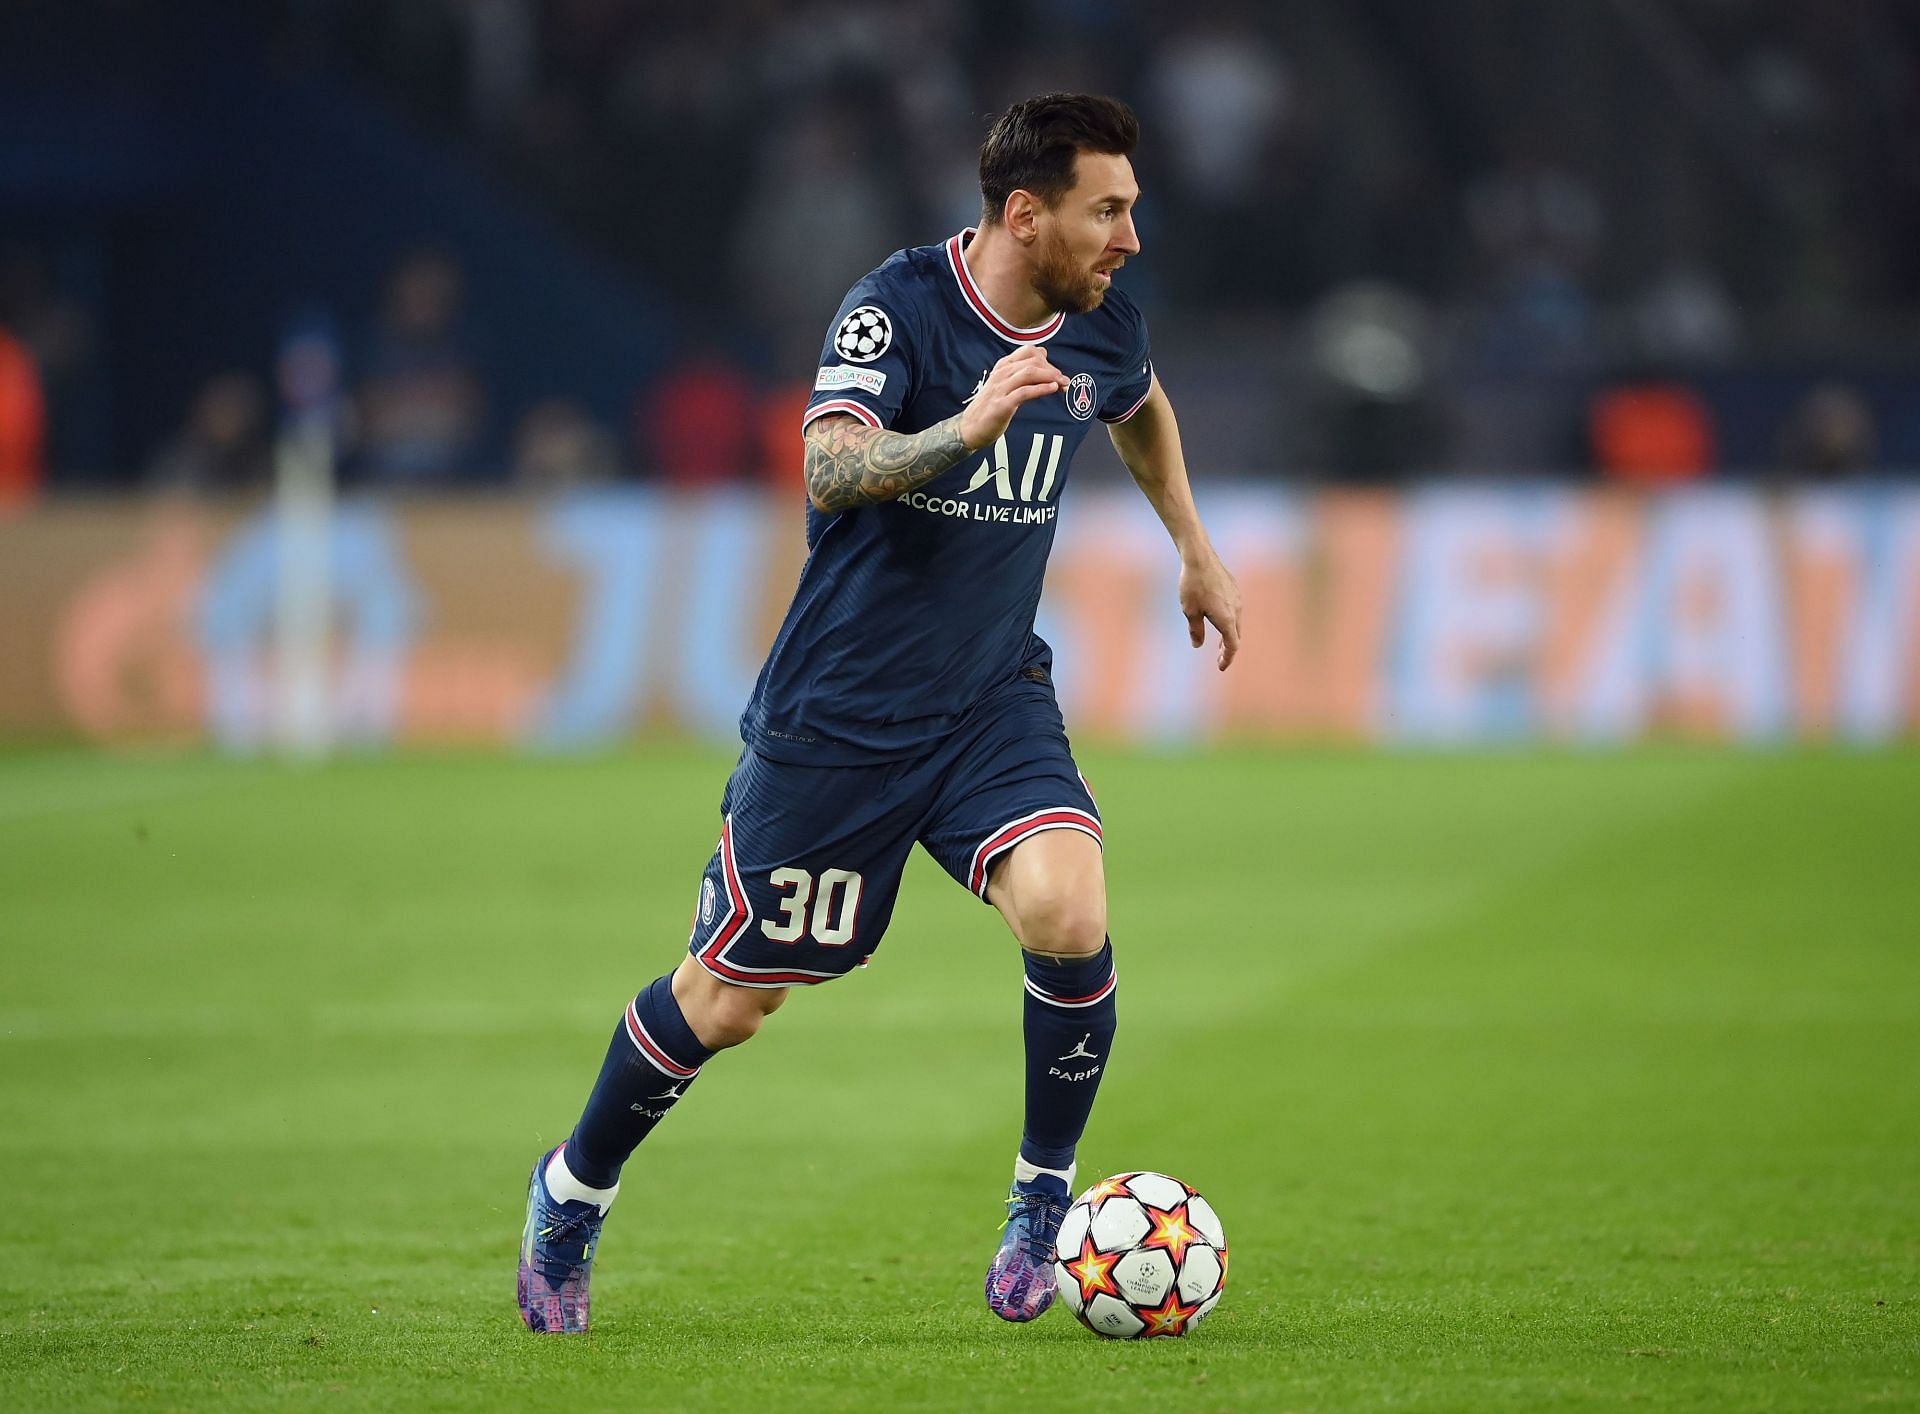 PSG have struggled to find cohesion since the arrival of Lionel Messi, says Angel Di Maria.